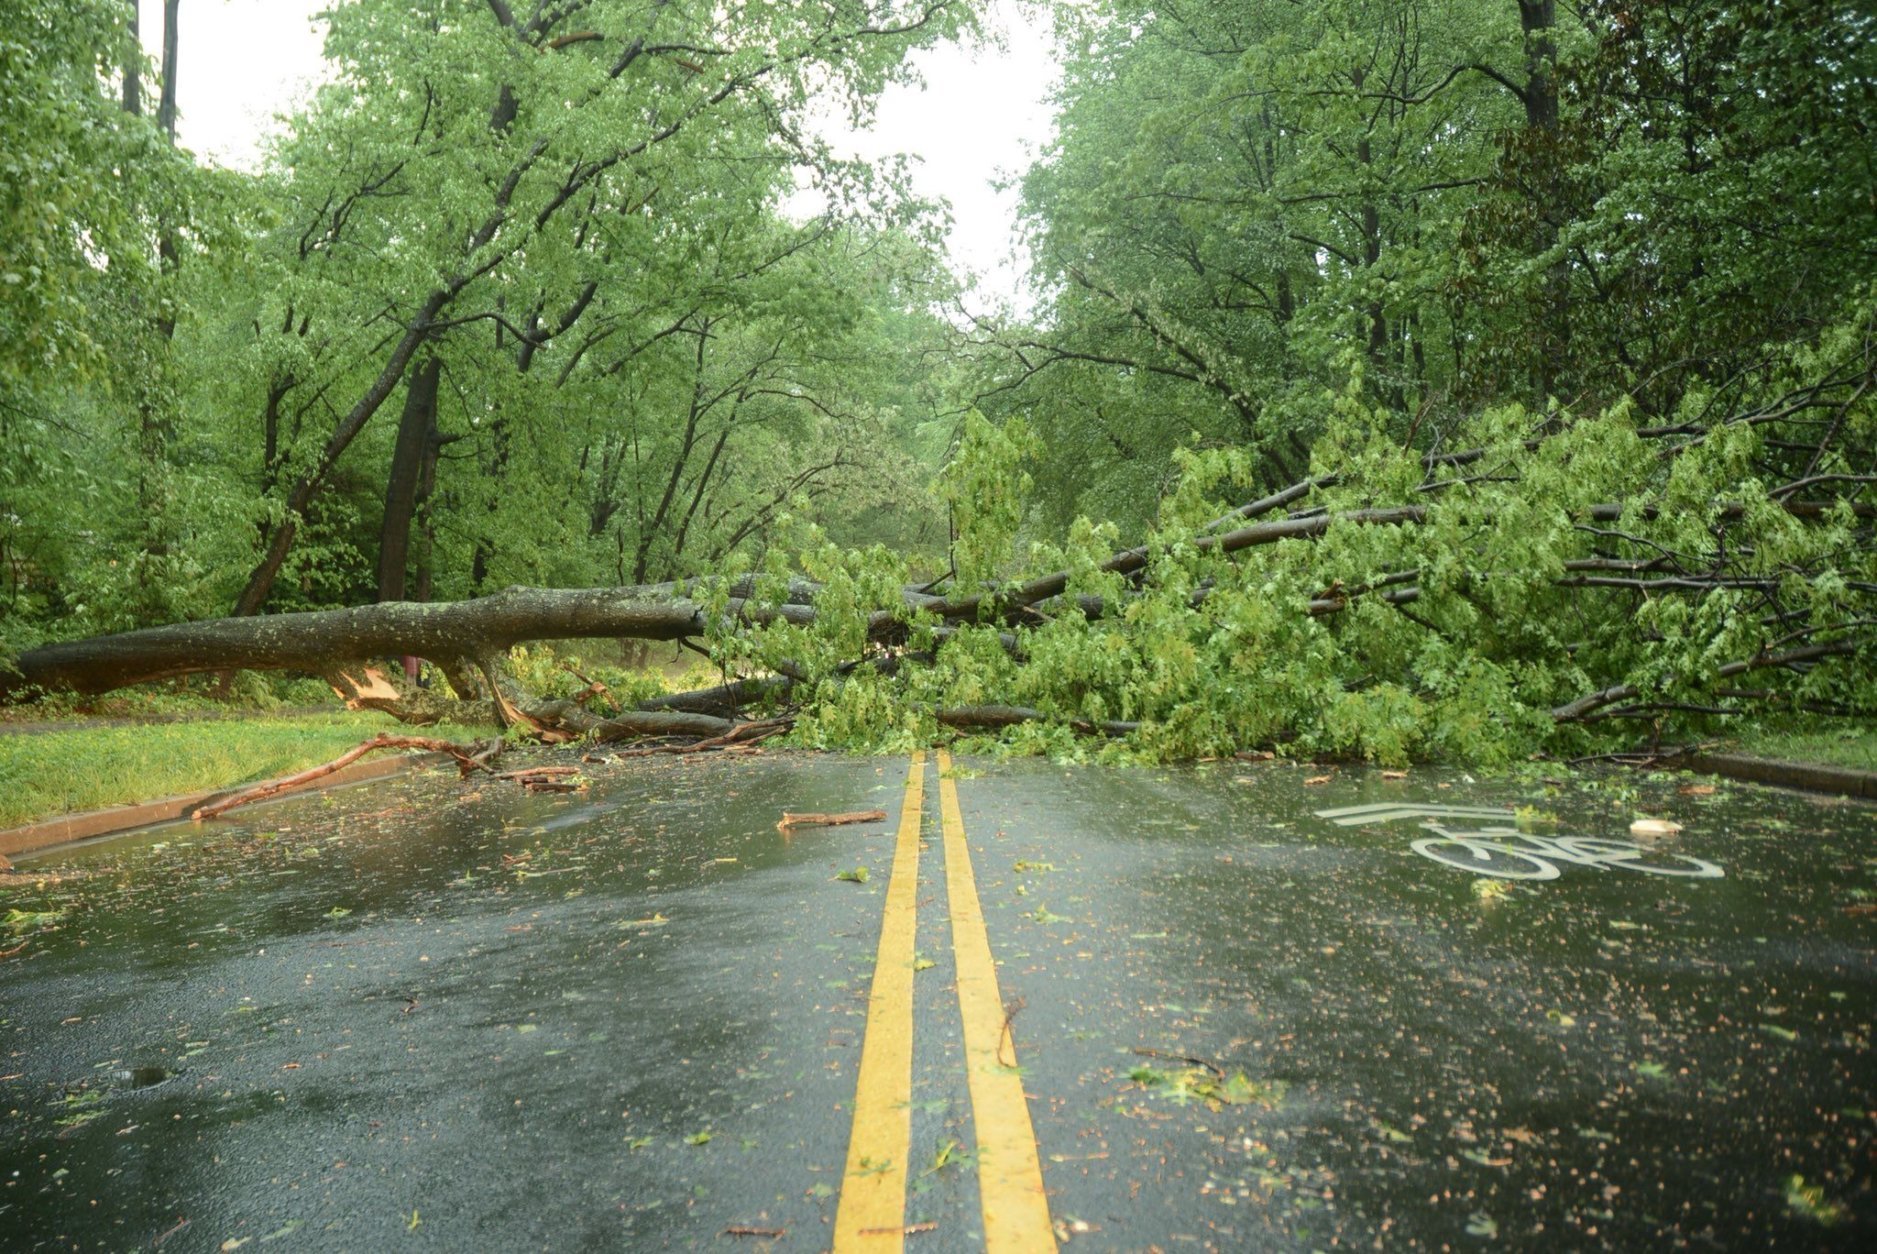 A couple of large trees come down on Glade Drive near Soapstone Drive in Reston. (WTOP/Dave Dildine)